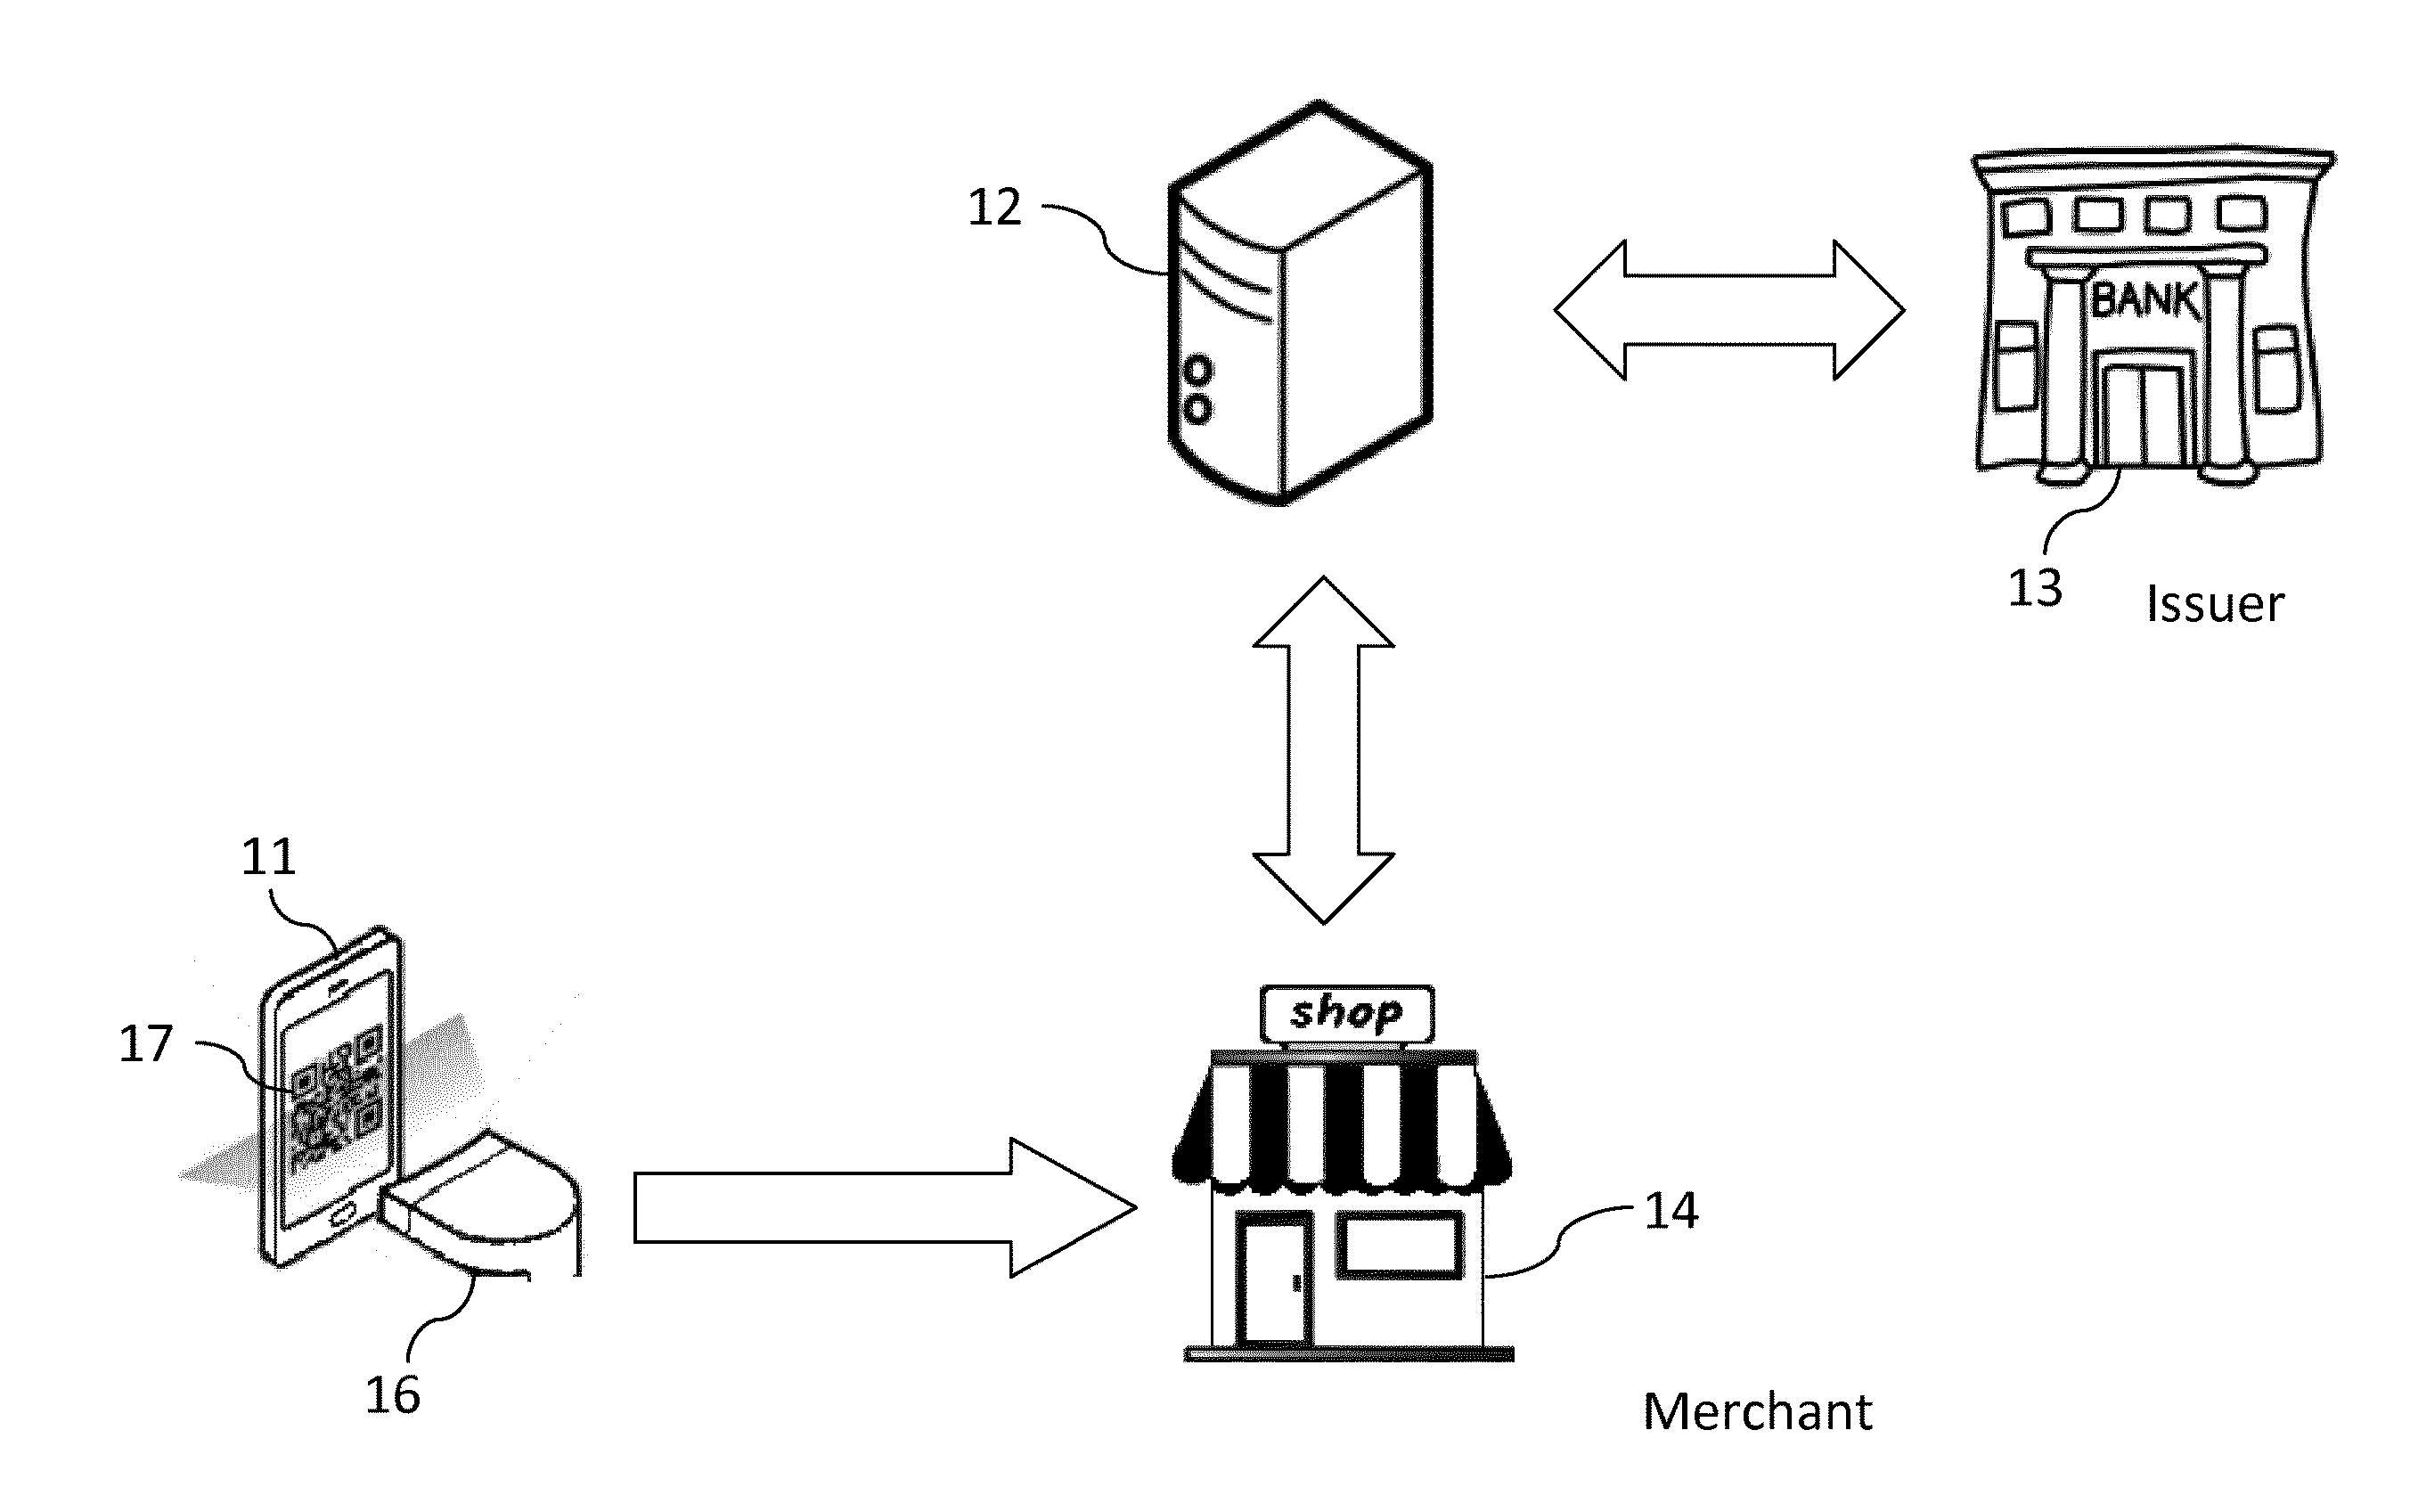 Method for authenticating transactions